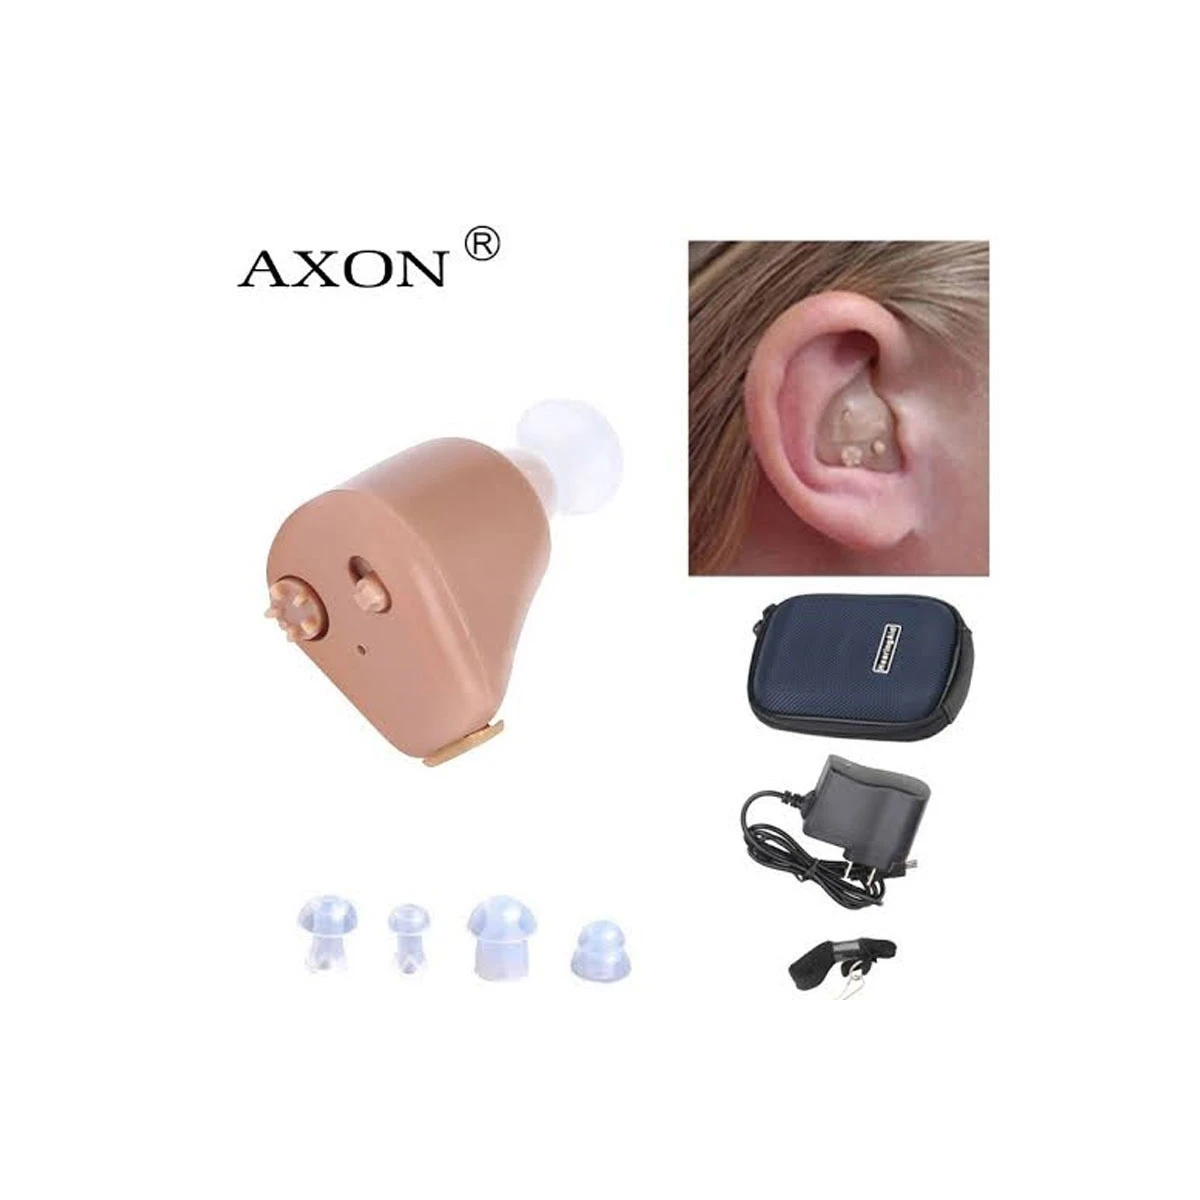 Axon Rechargeable Hearing Aid Machine k-88